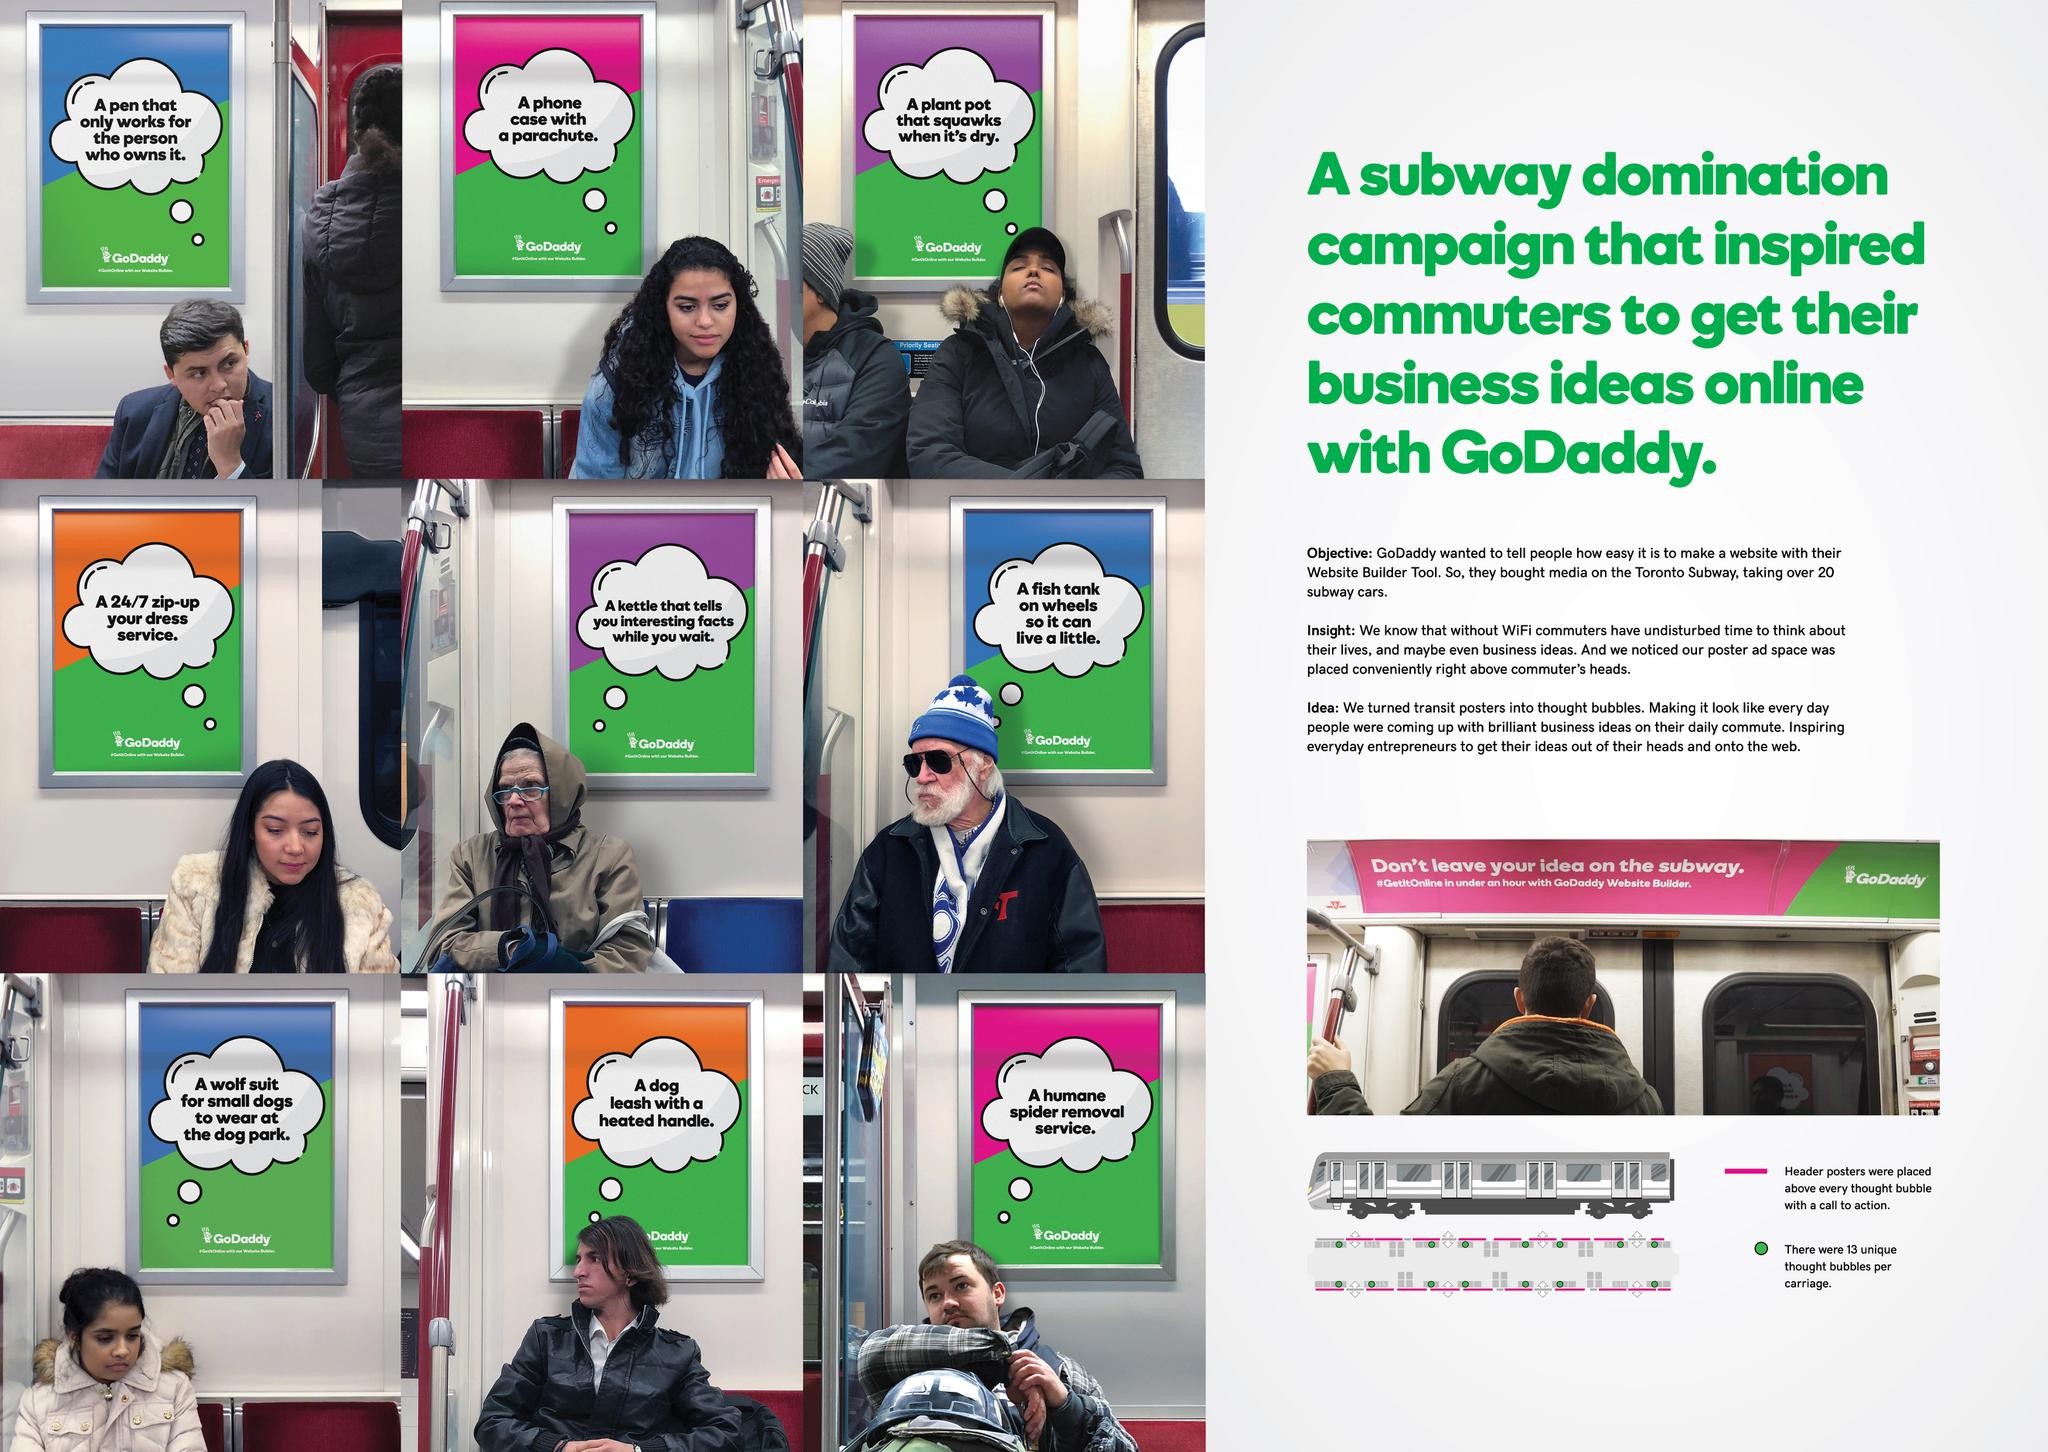 GoDaddy - Don't Leave Your Ideas on the Subway